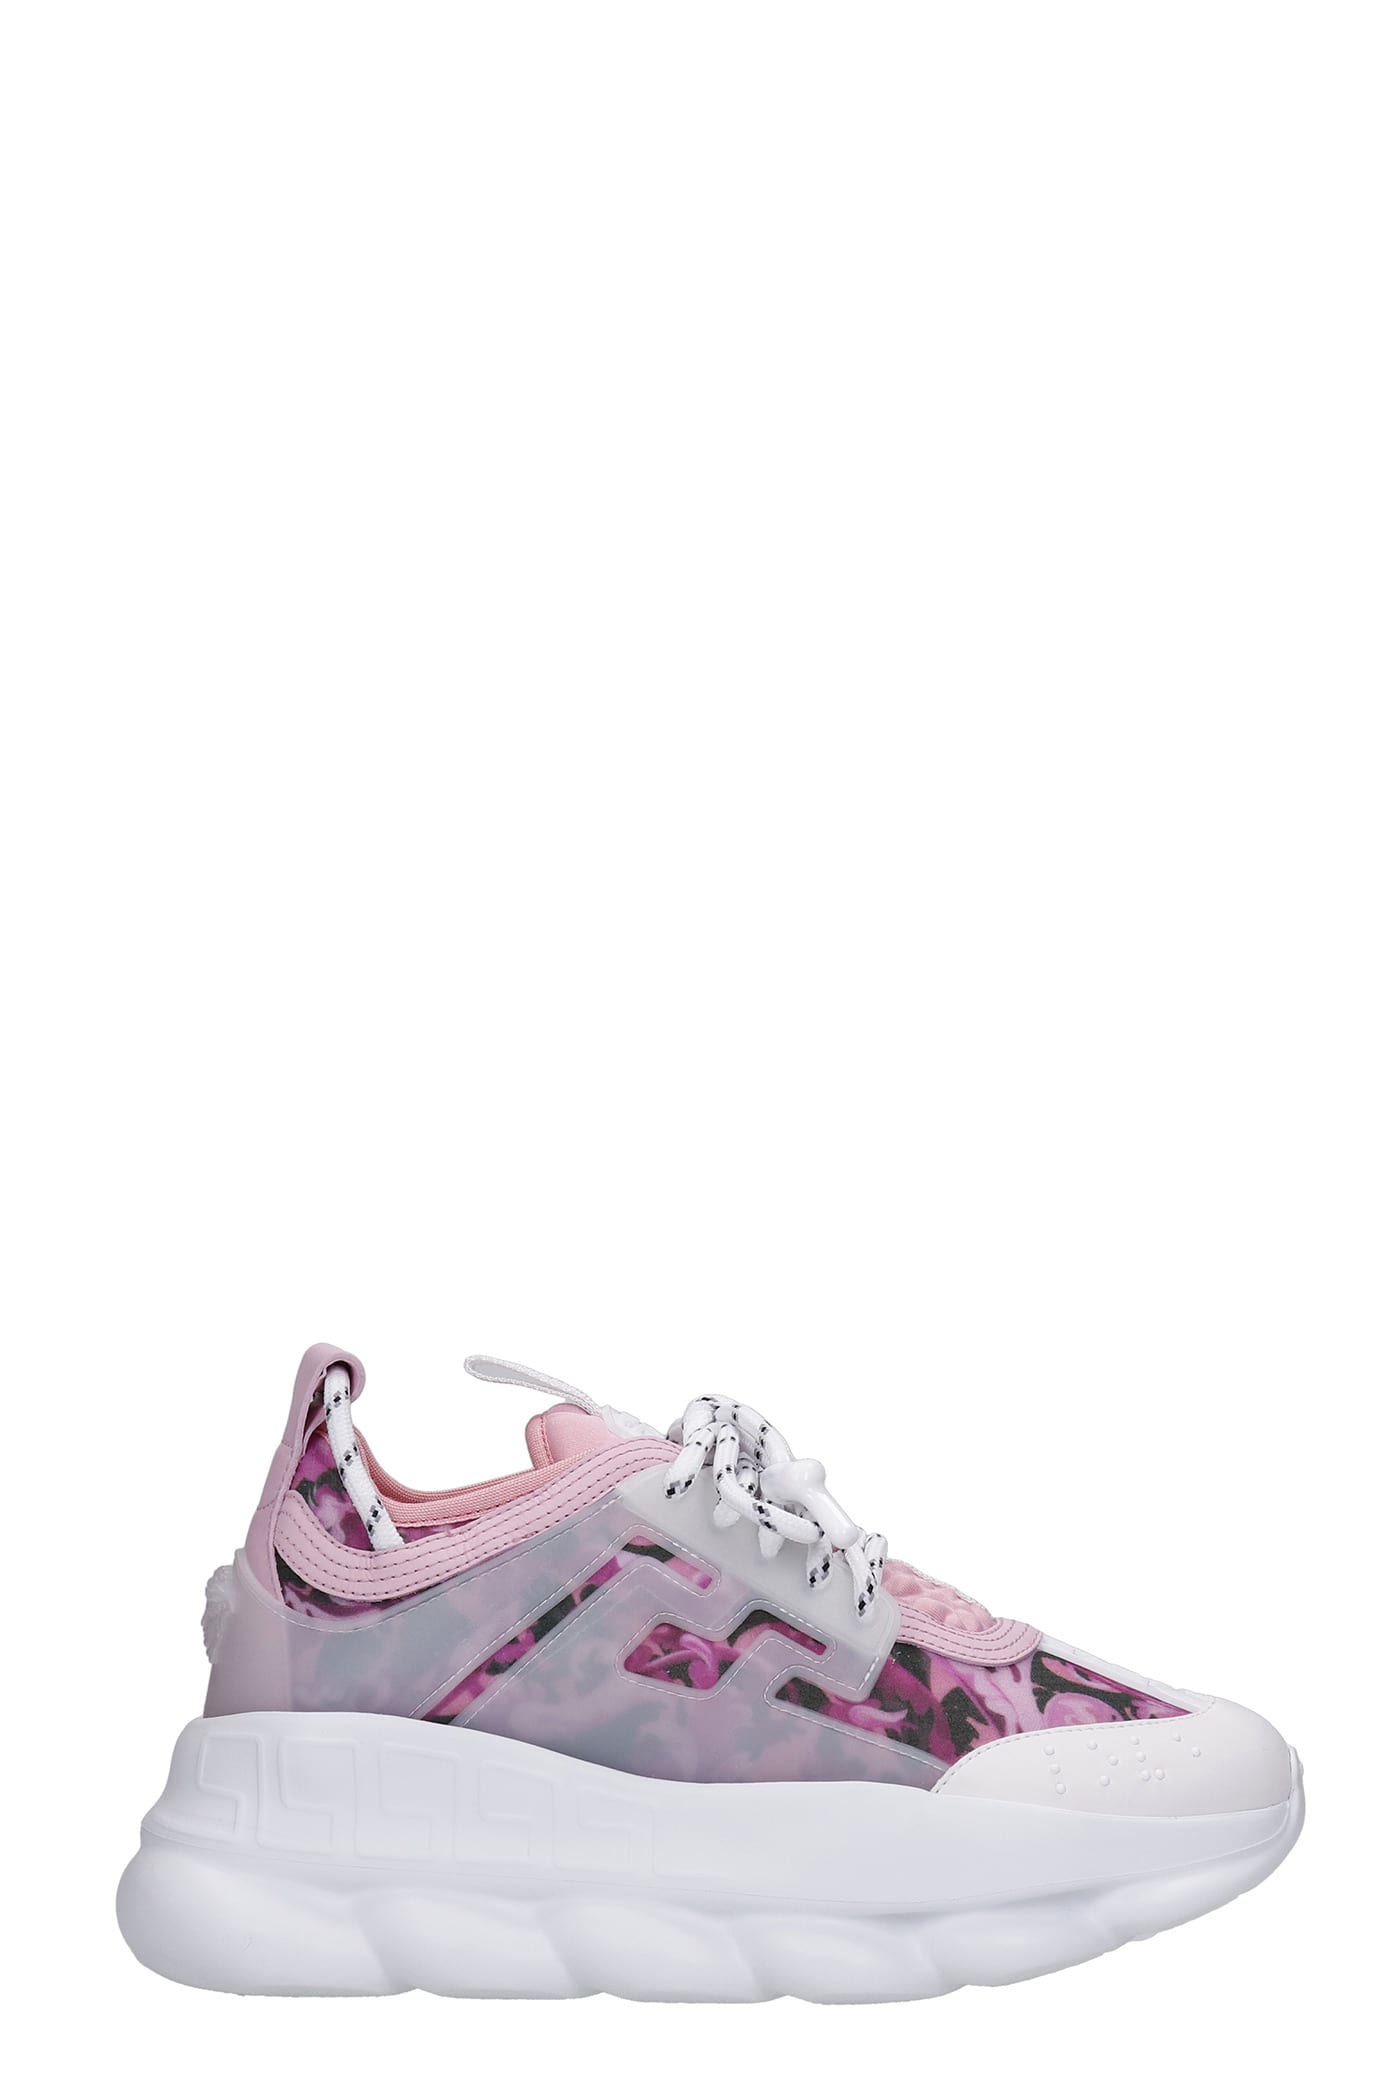 VERSACE SNEAKERS IN ROSE-PINK SYNTHETIC FIBERS,DSR705G1A013406W310